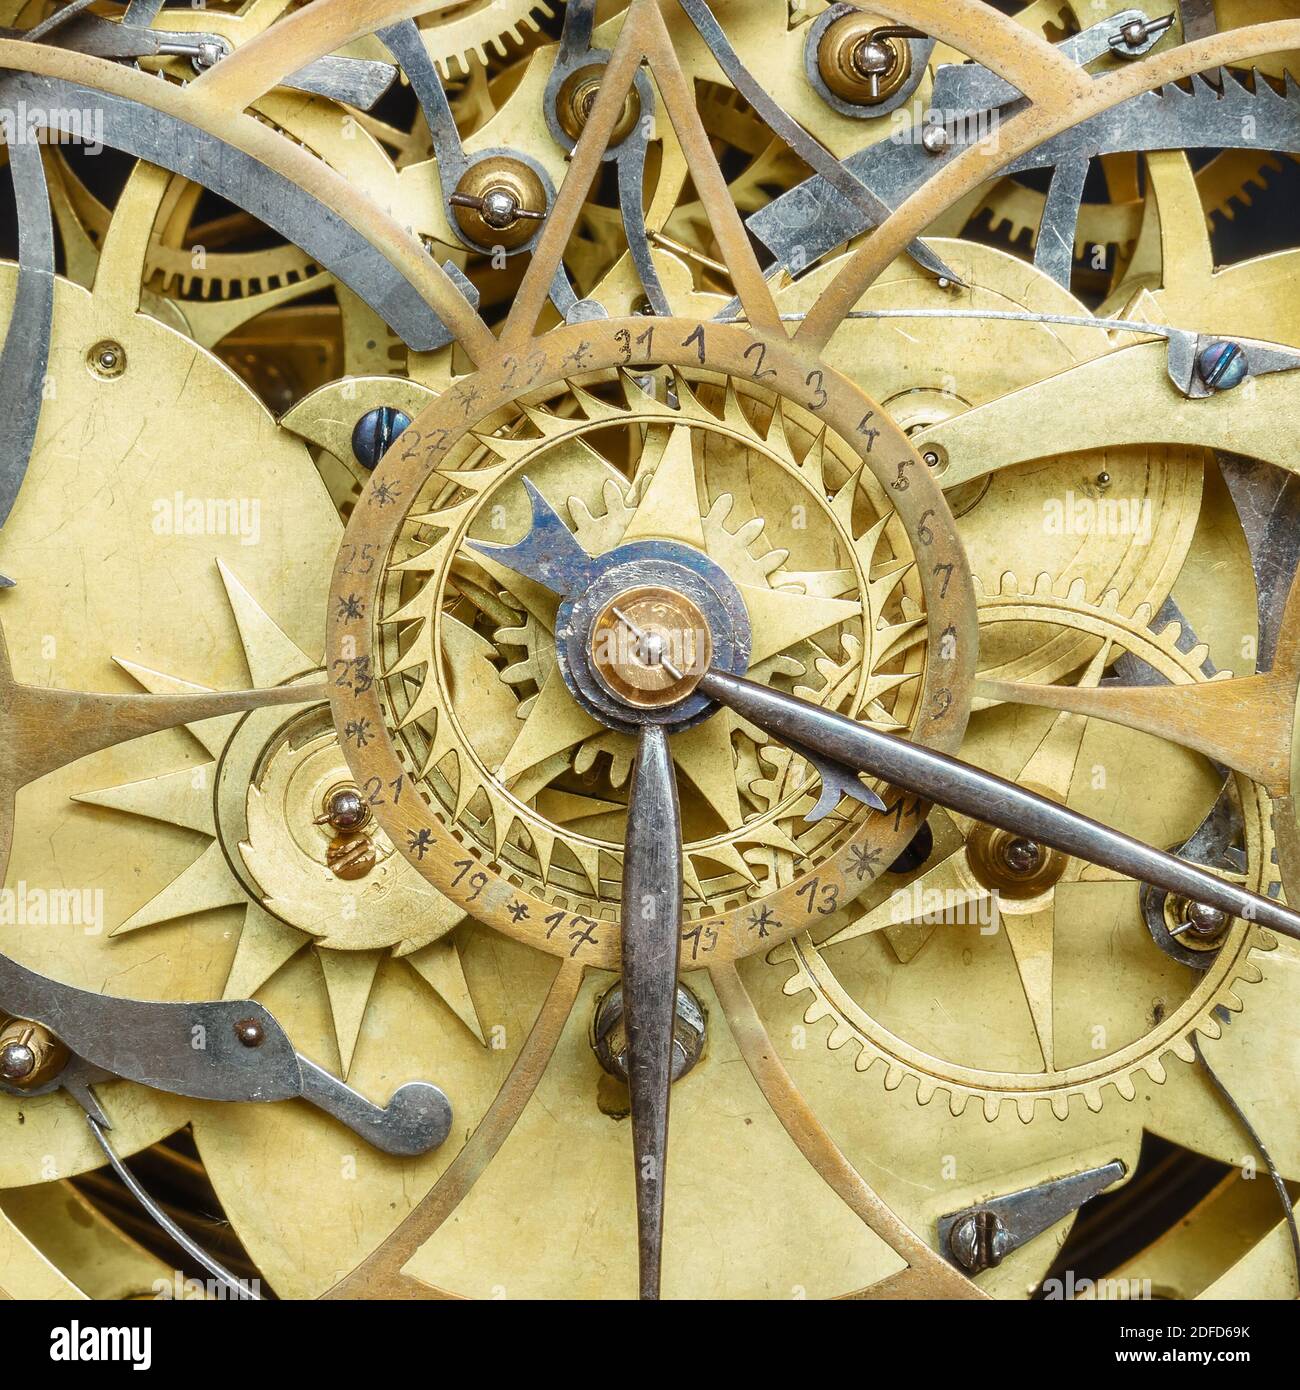 Innerworks of an antique clock with gear wheels and hour and minute hand Stock Photo